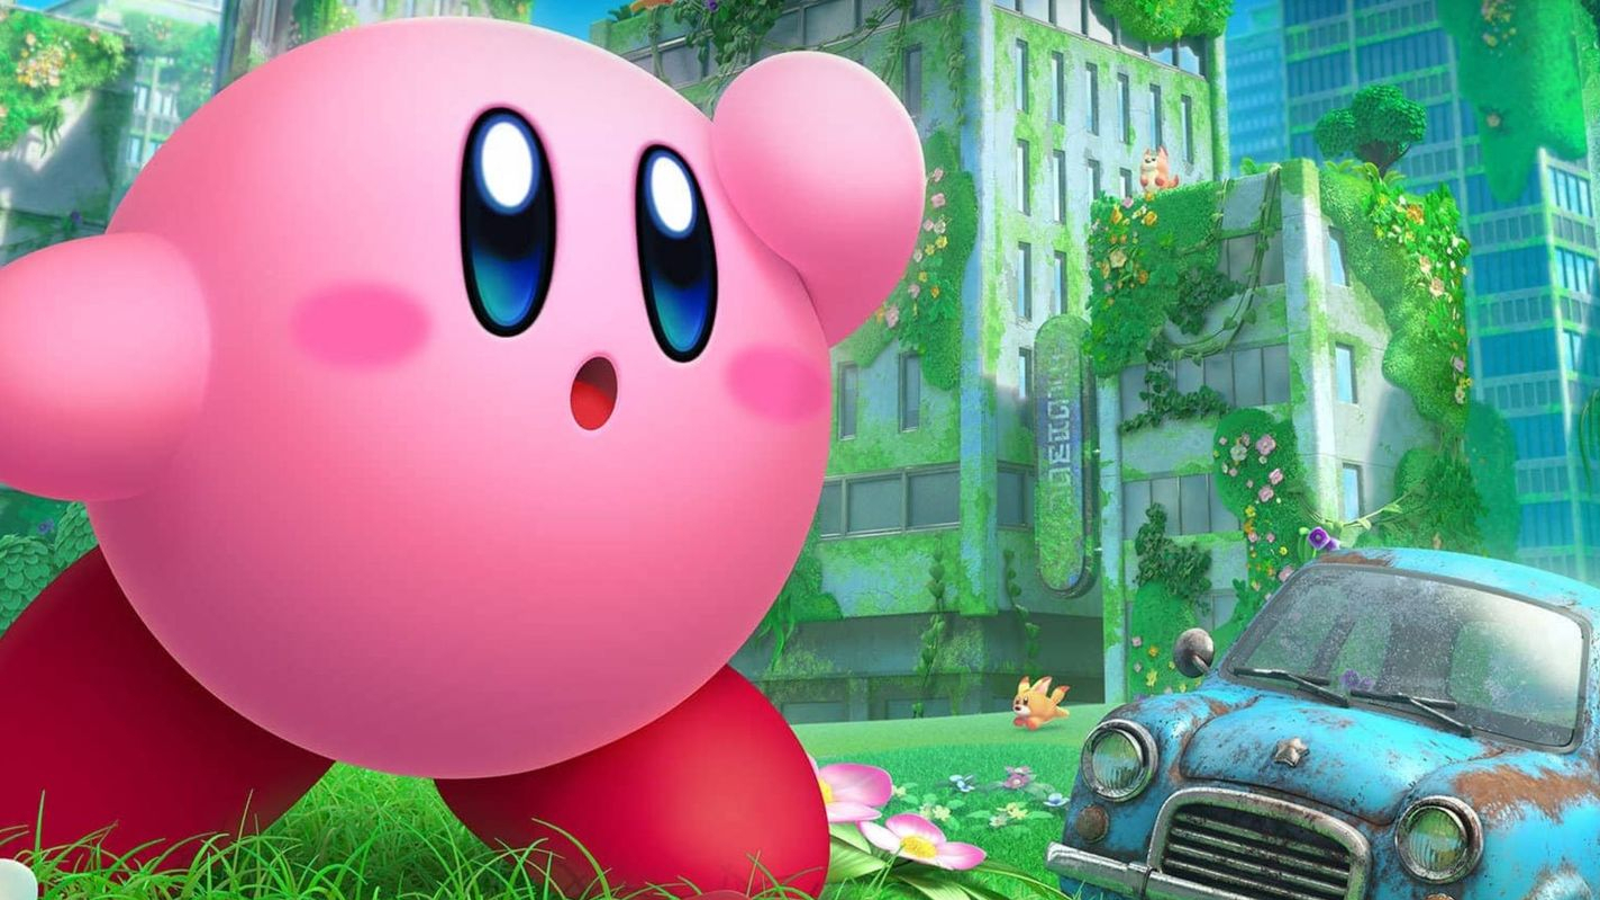 Kirby and the Forgotten Land Nintendo Switch Review